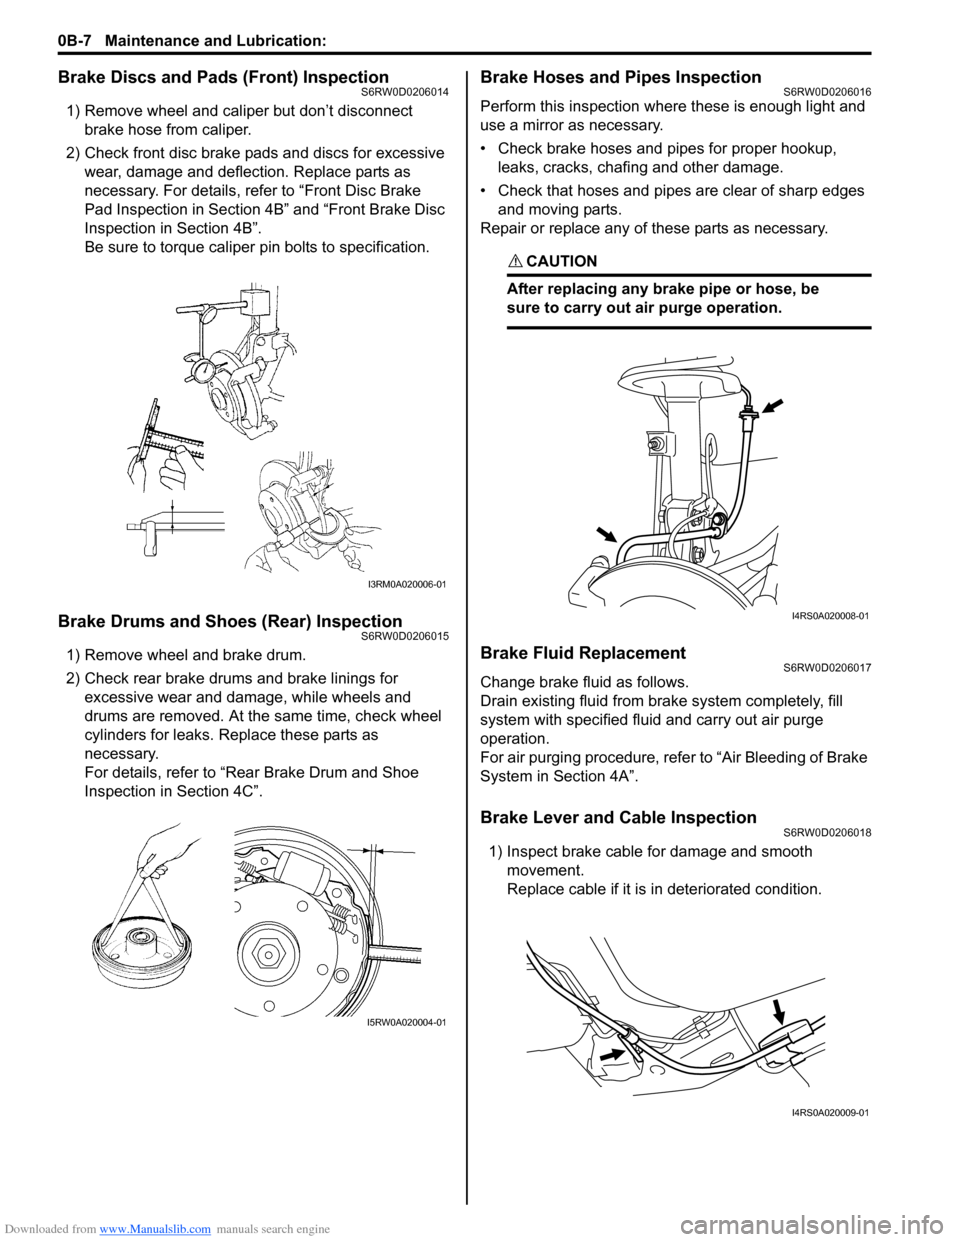 SUZUKI SX4 2006 1.G Service Workshop Manual Downloaded from www.Manualslib.com manuals search engine 0B-7 Maintenance and Lubrication: 
Brake Discs and Pads (Front) InspectionS6RW0D0206014
1) Remove wheel and caliper but don’t disconnect 
bra